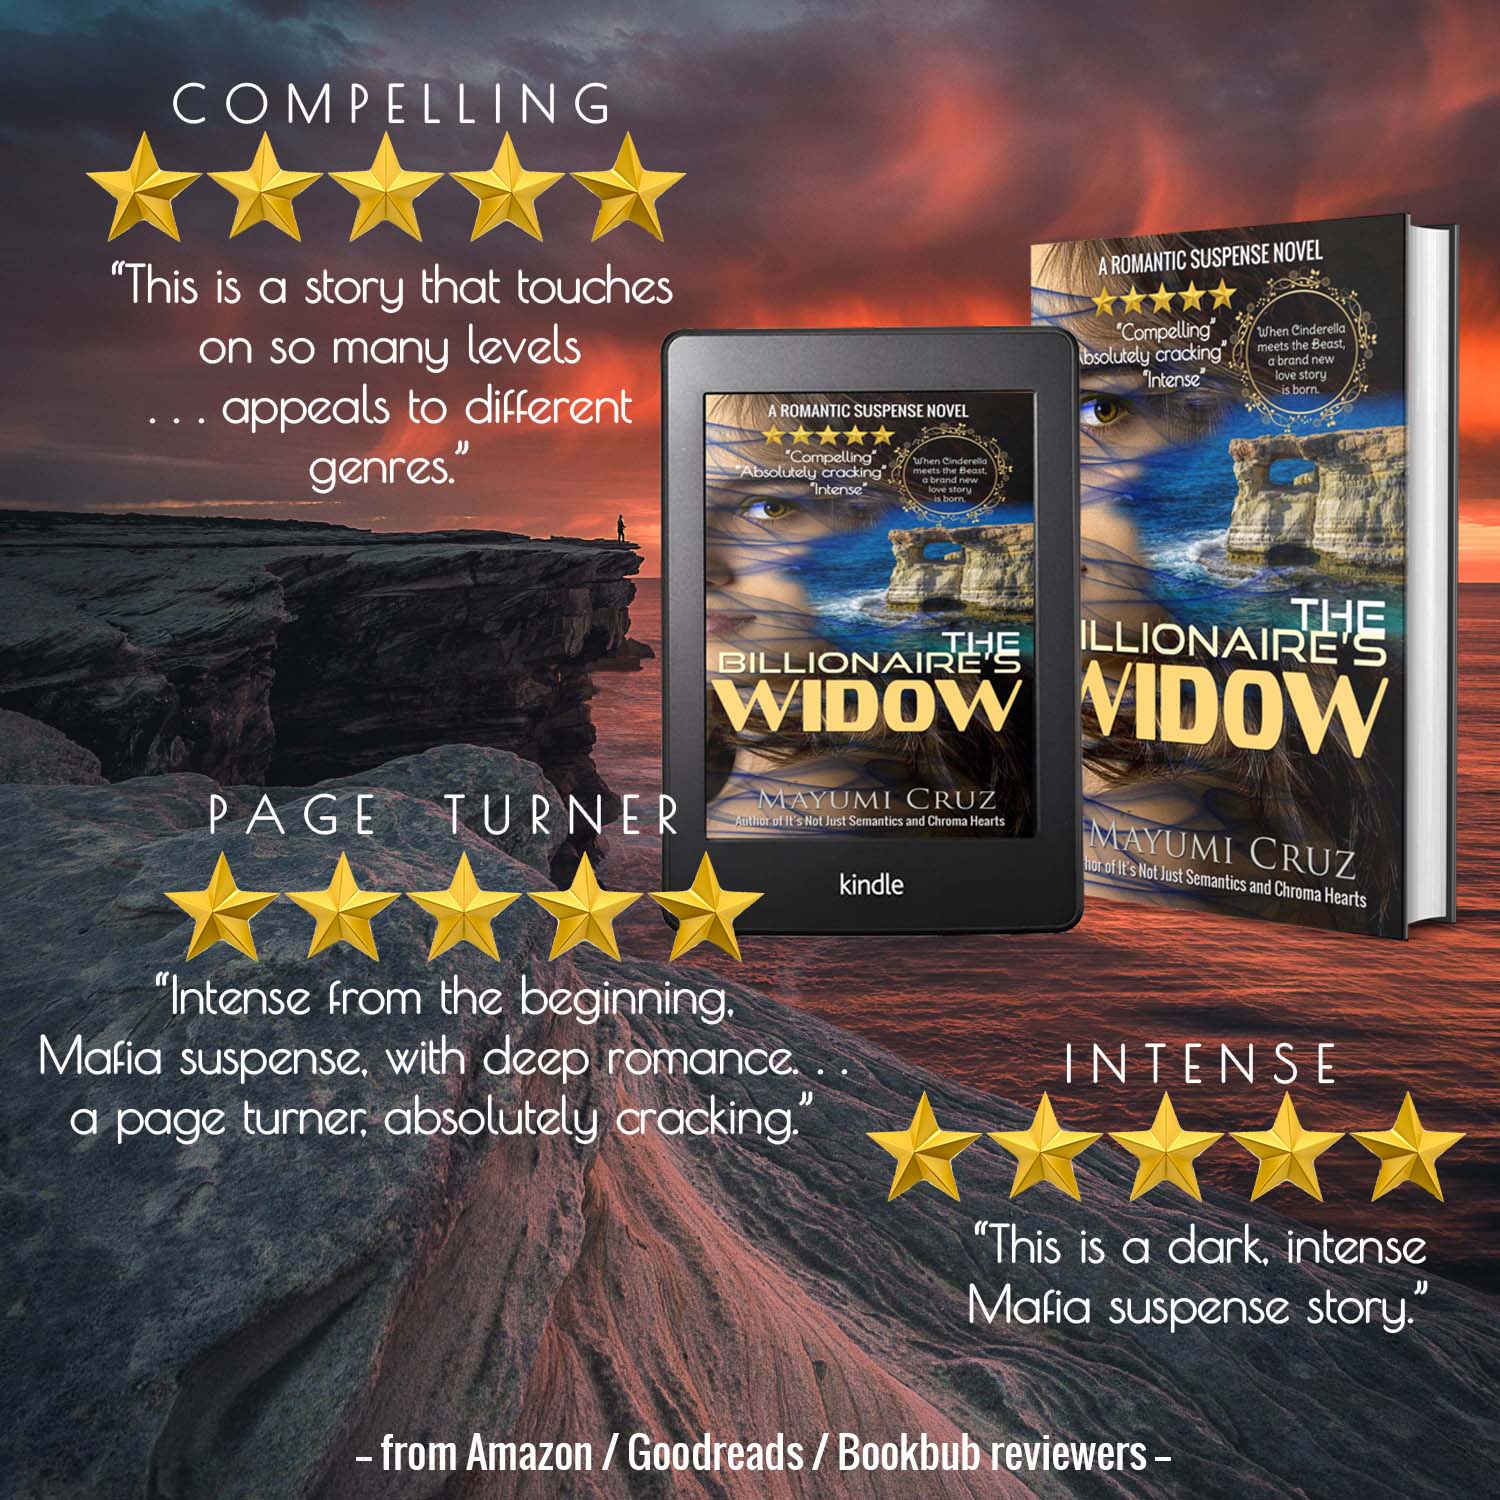 Five-star reviews for The Billionaire's Widow